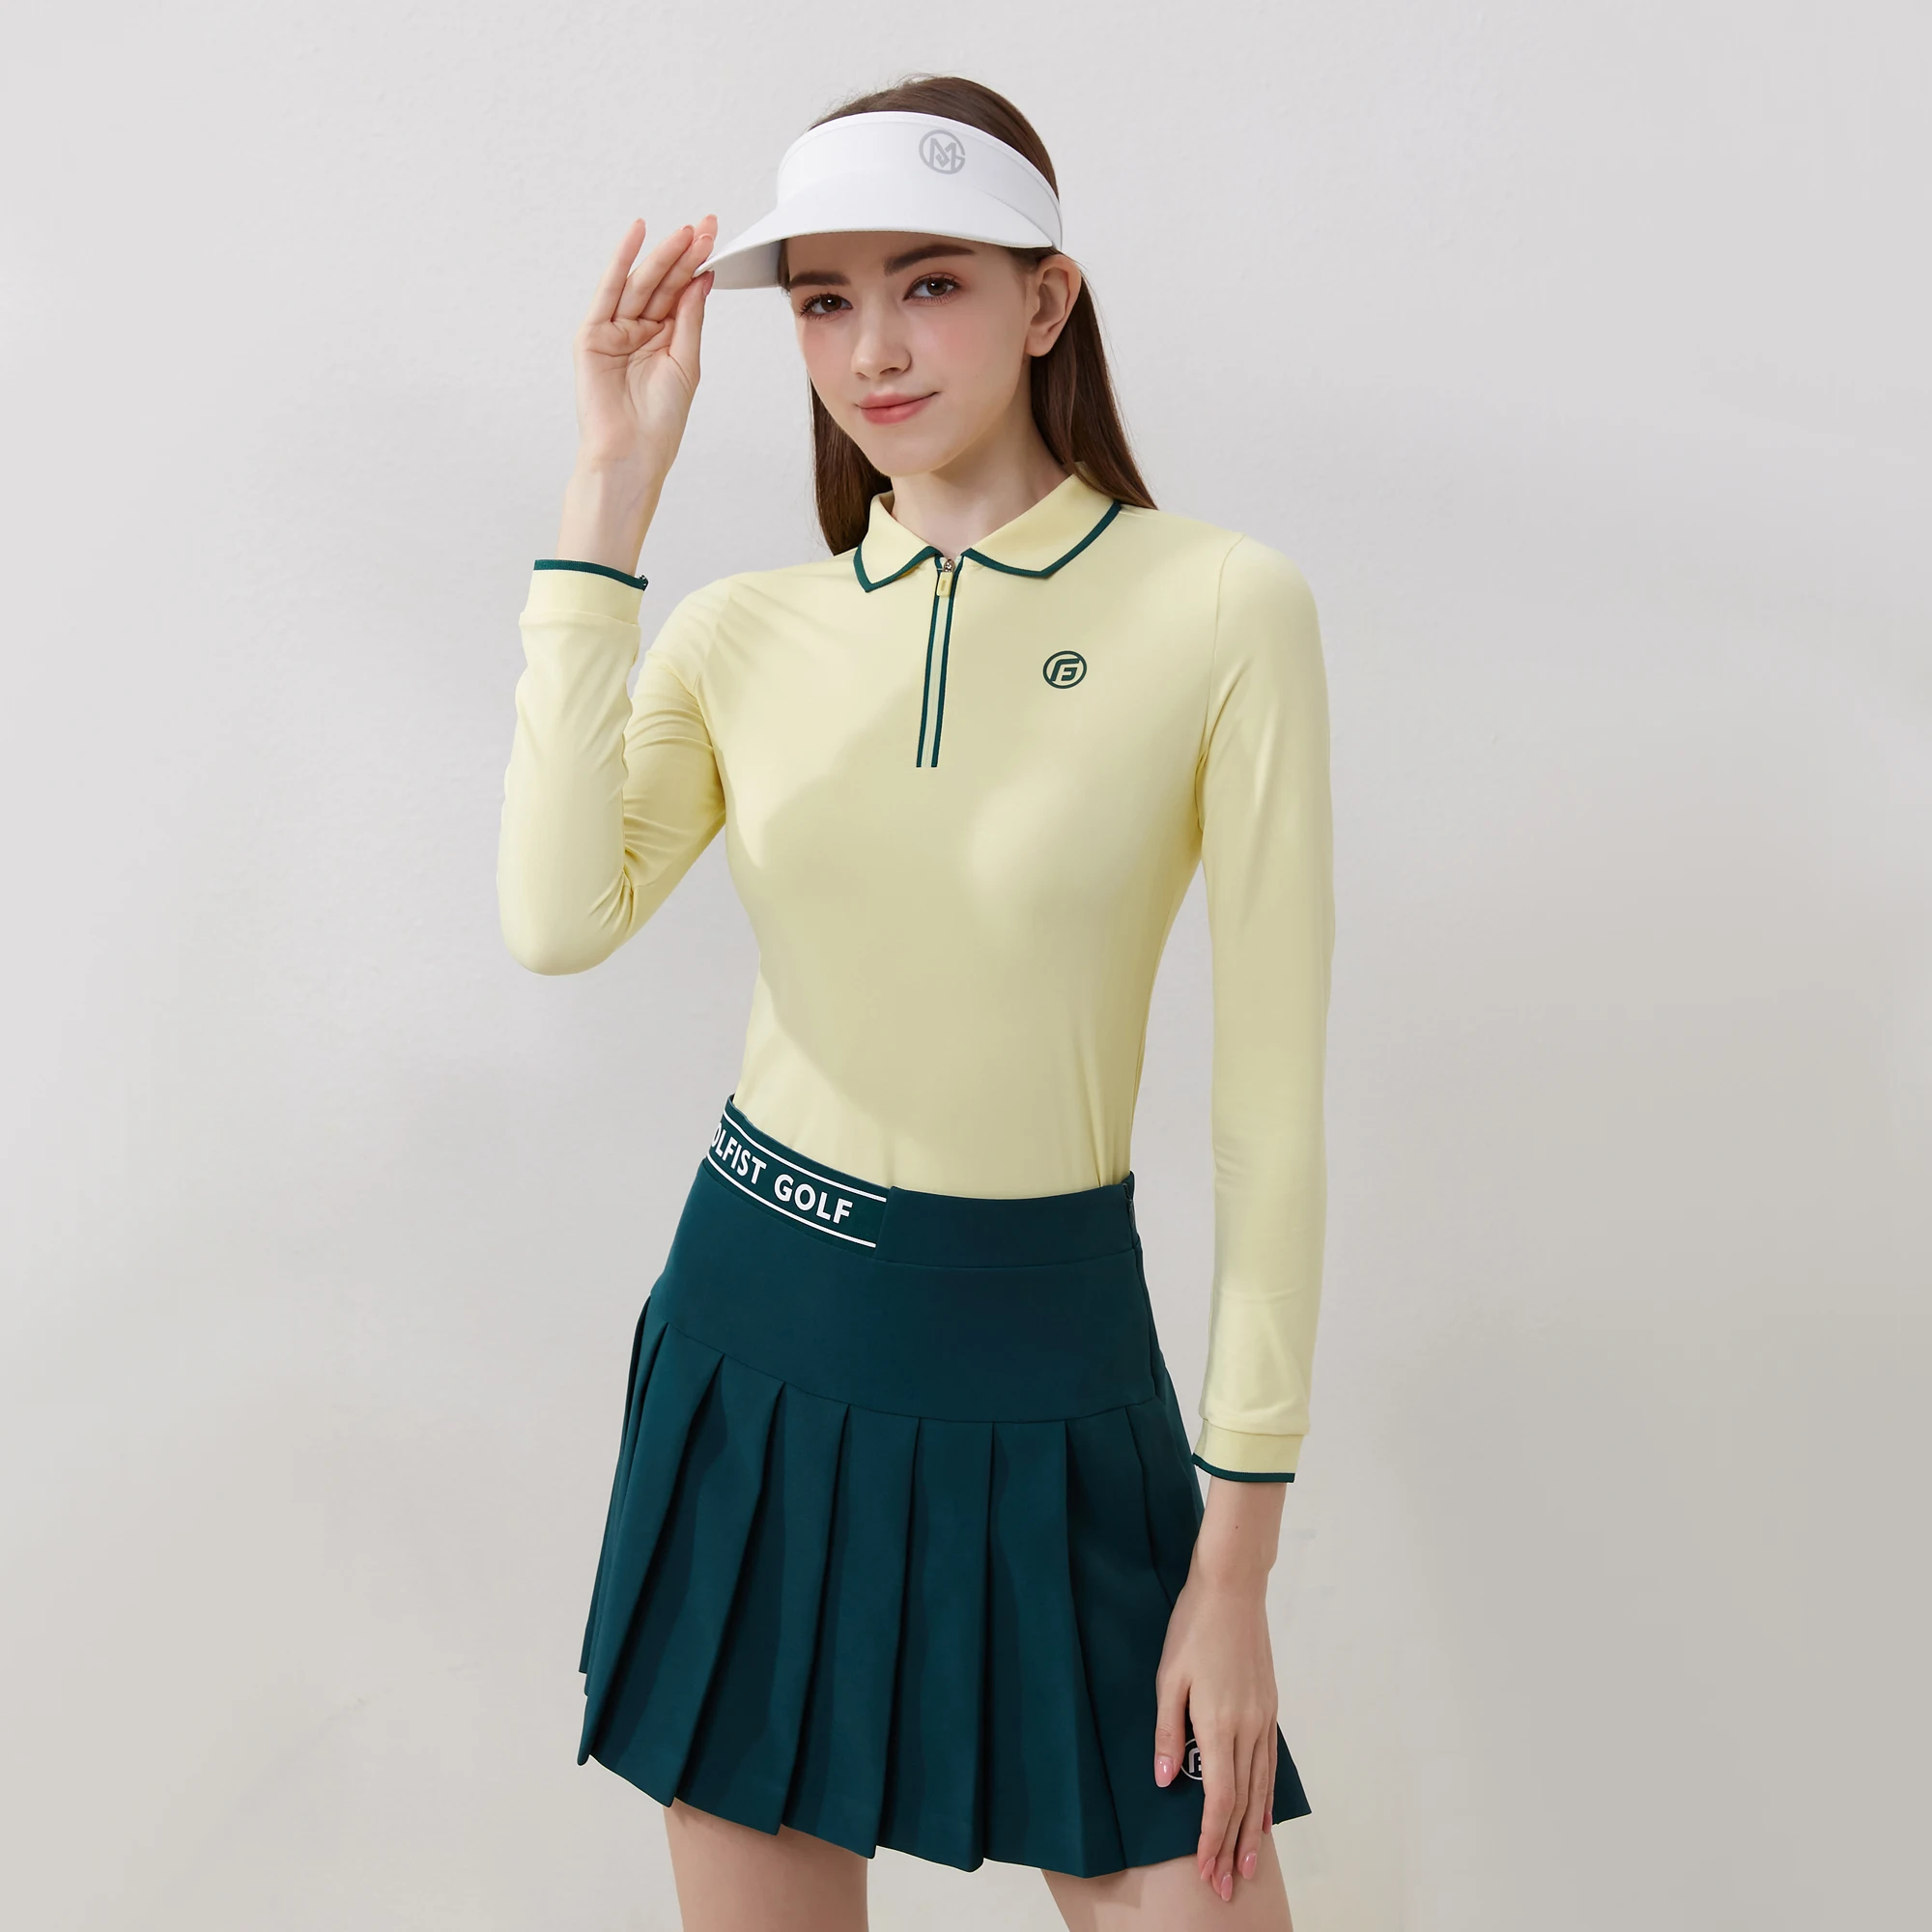 Golfist Golf Autumn and Spring Women Skirt Elastic Causal Sports Pleated Short Skirts With Pants inside Ladies Golf Tennis Wear